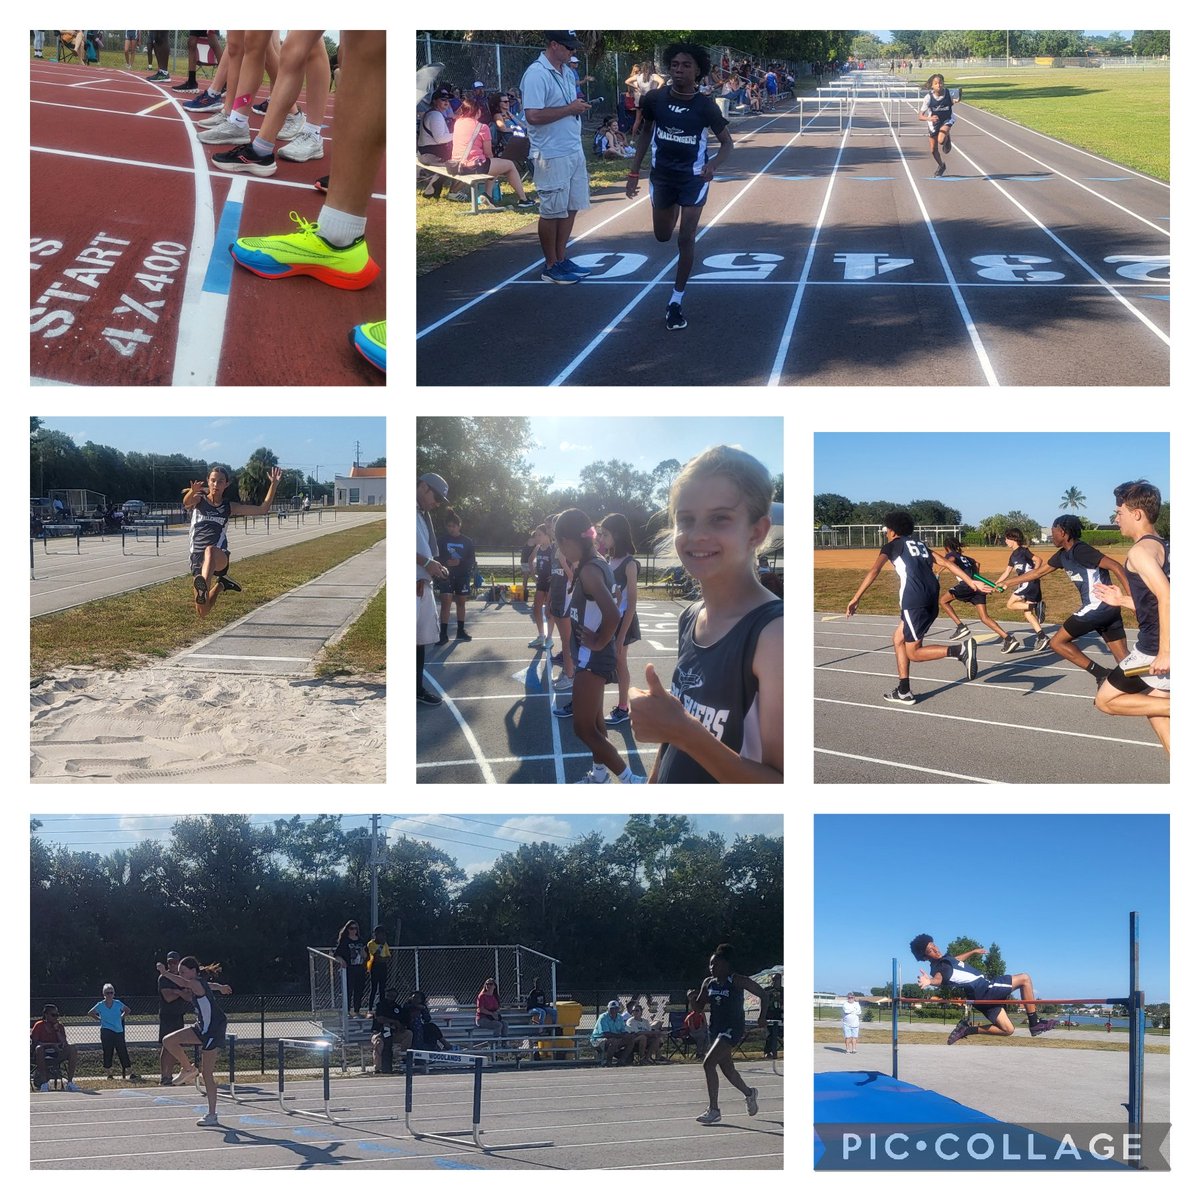 Cmms track and field regular season comes to a close with a final home meet on our new track! Next up...regionals. @CMMSPrincipal @CmmsMedia #trackandfield #tracklife #activekids